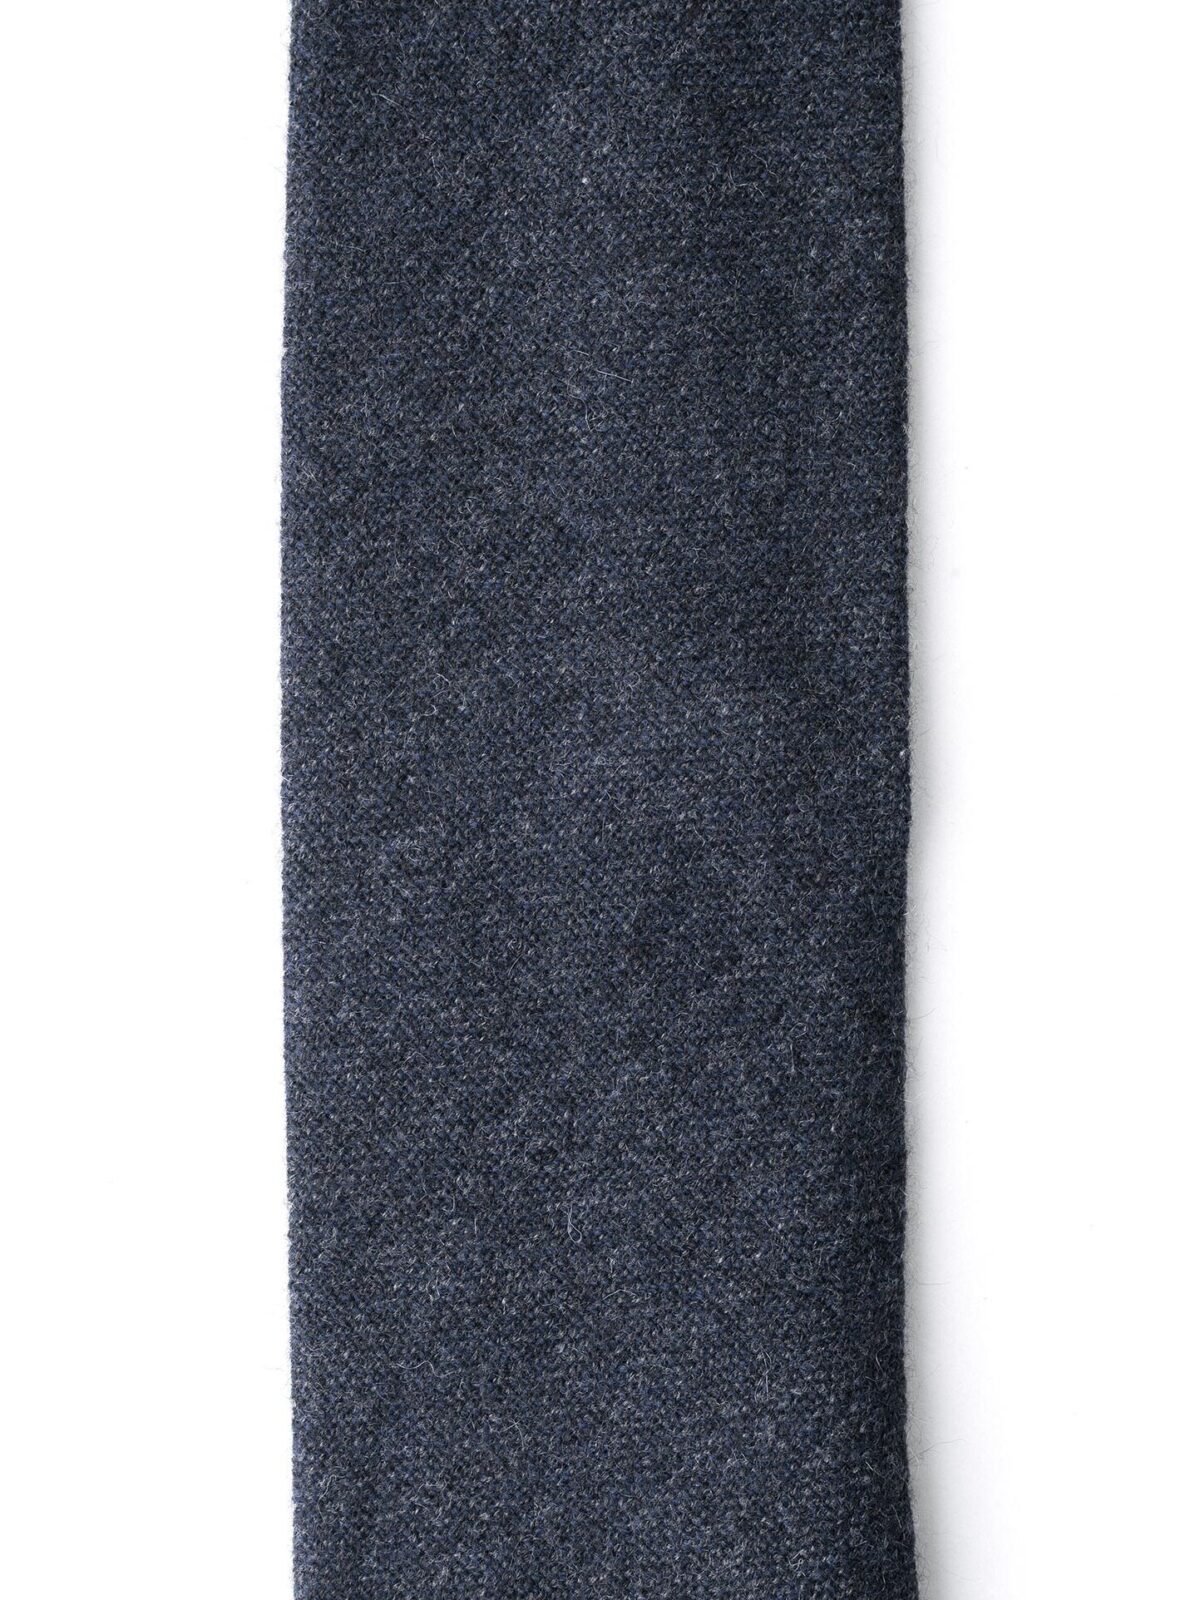 Charcoal Cashmere Tie